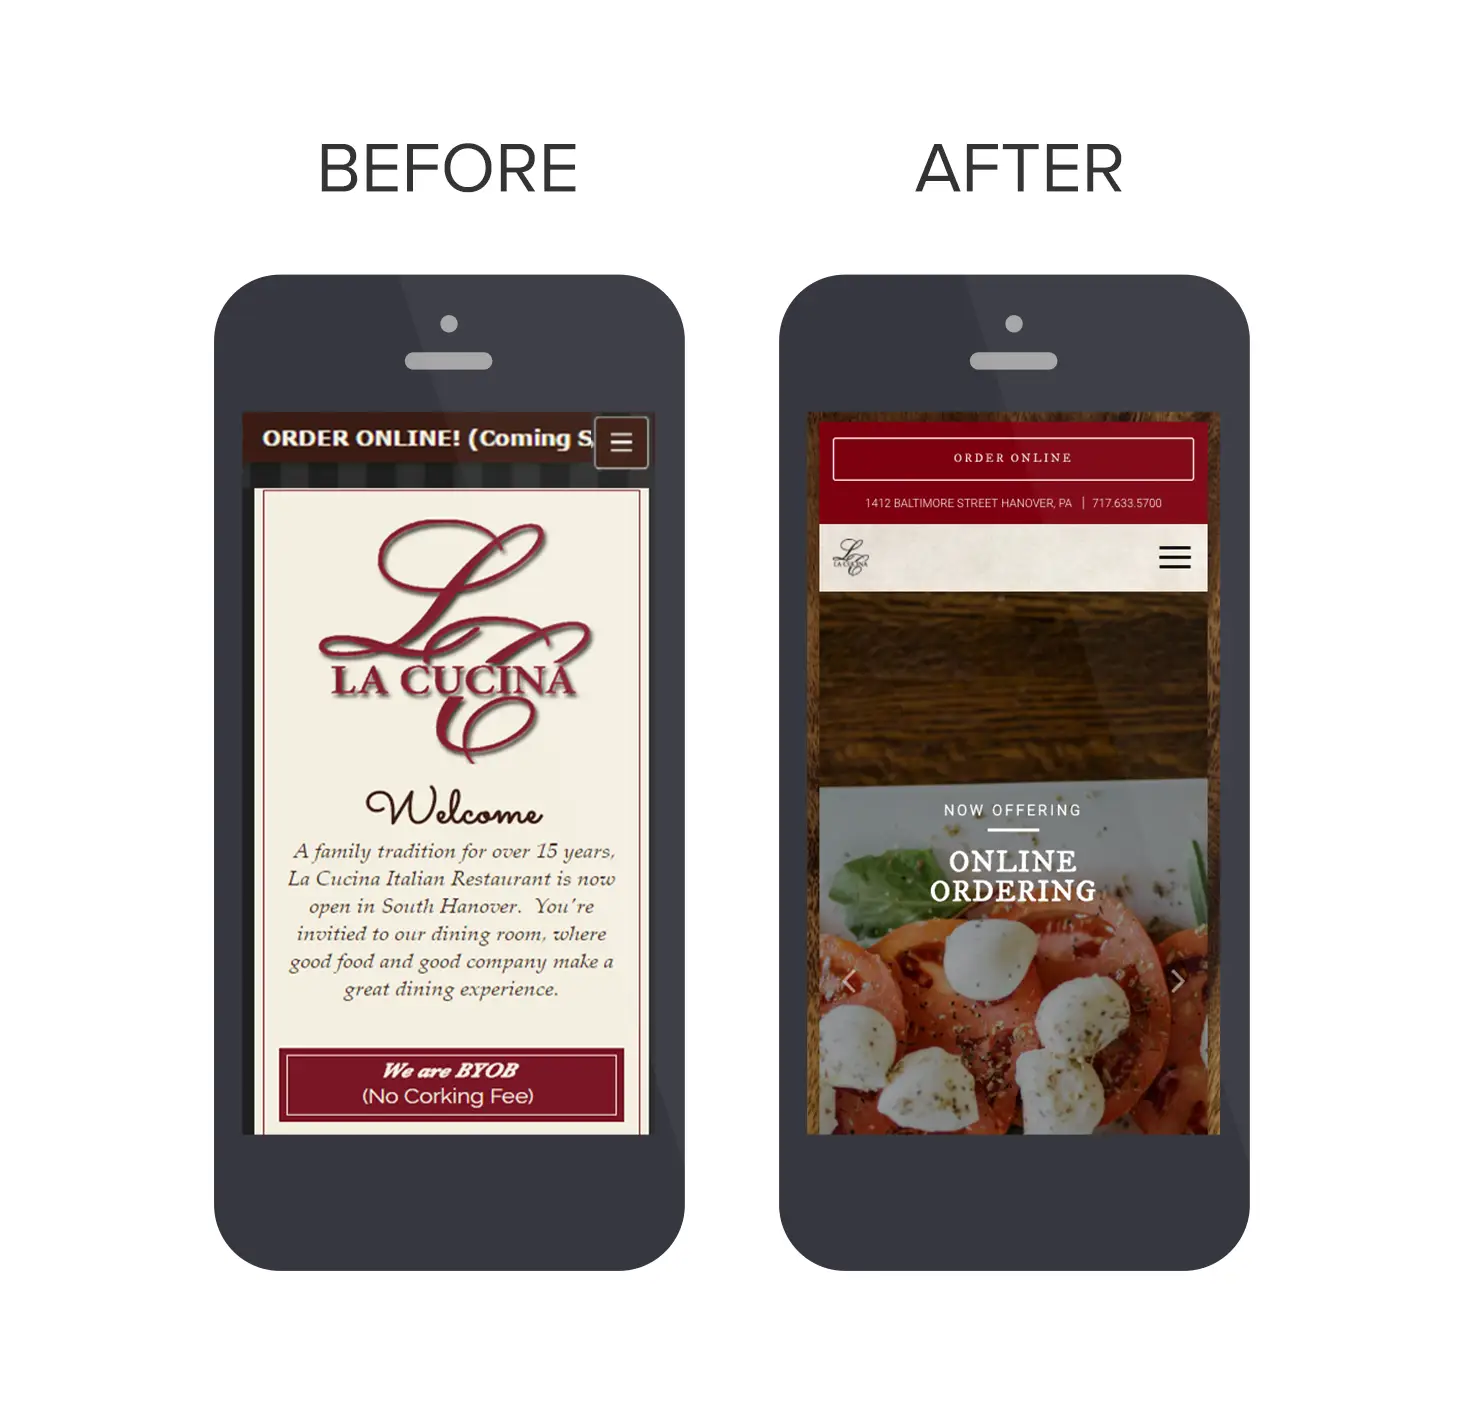 La Cucina website before and after shoots